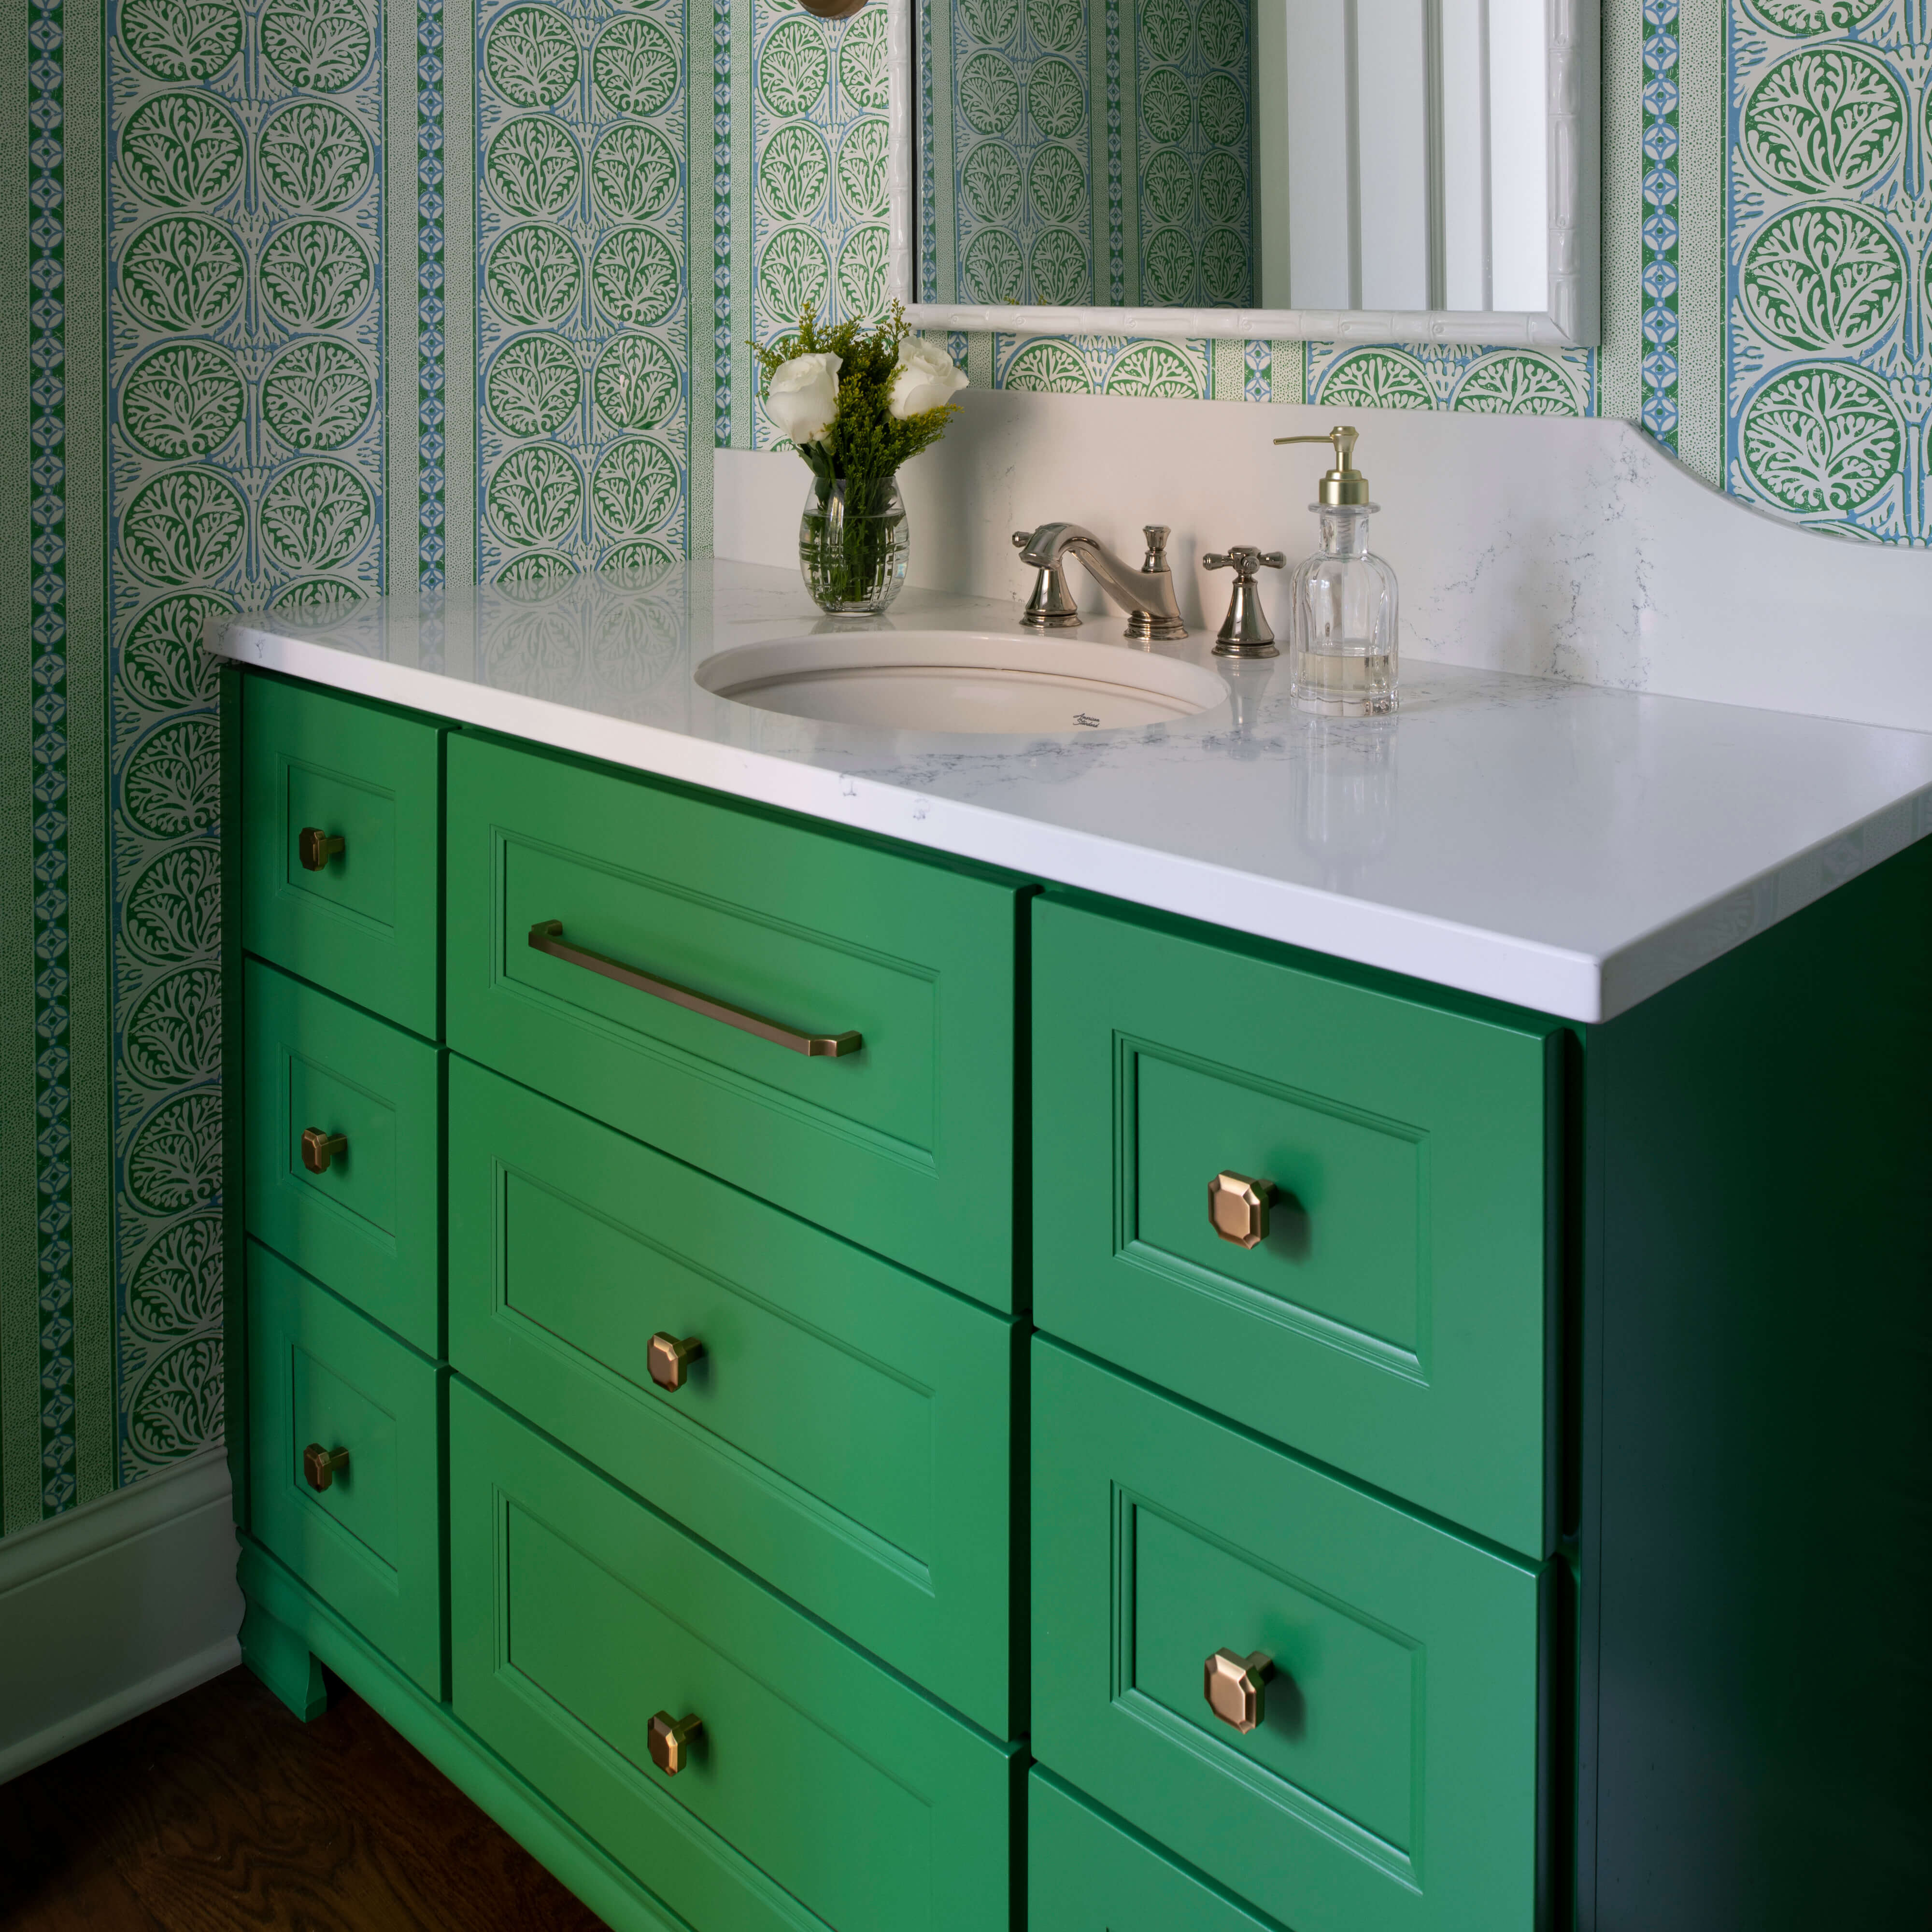 A vibrant, watermelon green bathroom vanity from Dura Supreme Cabinetry with elegant green wallpaper and brushed brass accents.